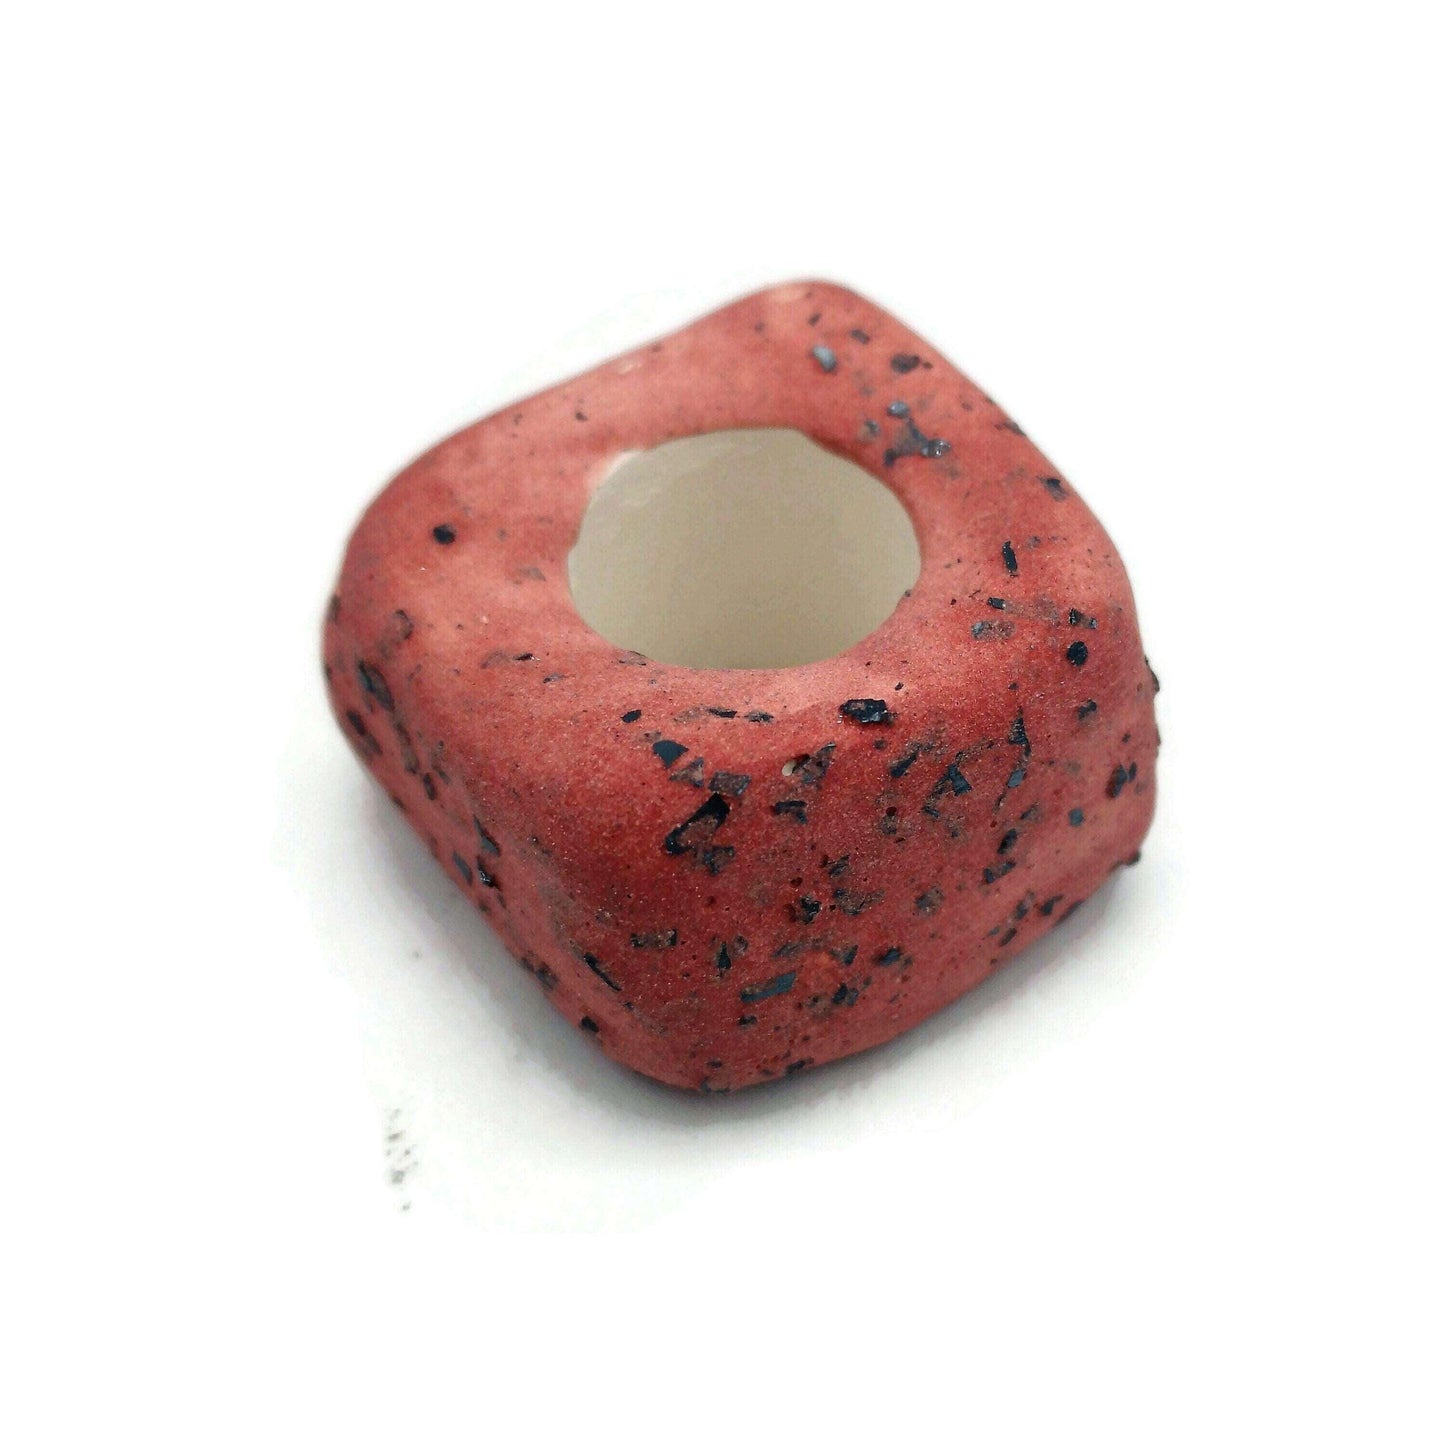 1Pc 25mm Extra Large Handmade Ceramic Beads For Macrame With Large Hole, Square Unique Chunky Clay Beads for Jewelry Making Sparkly Red Bead